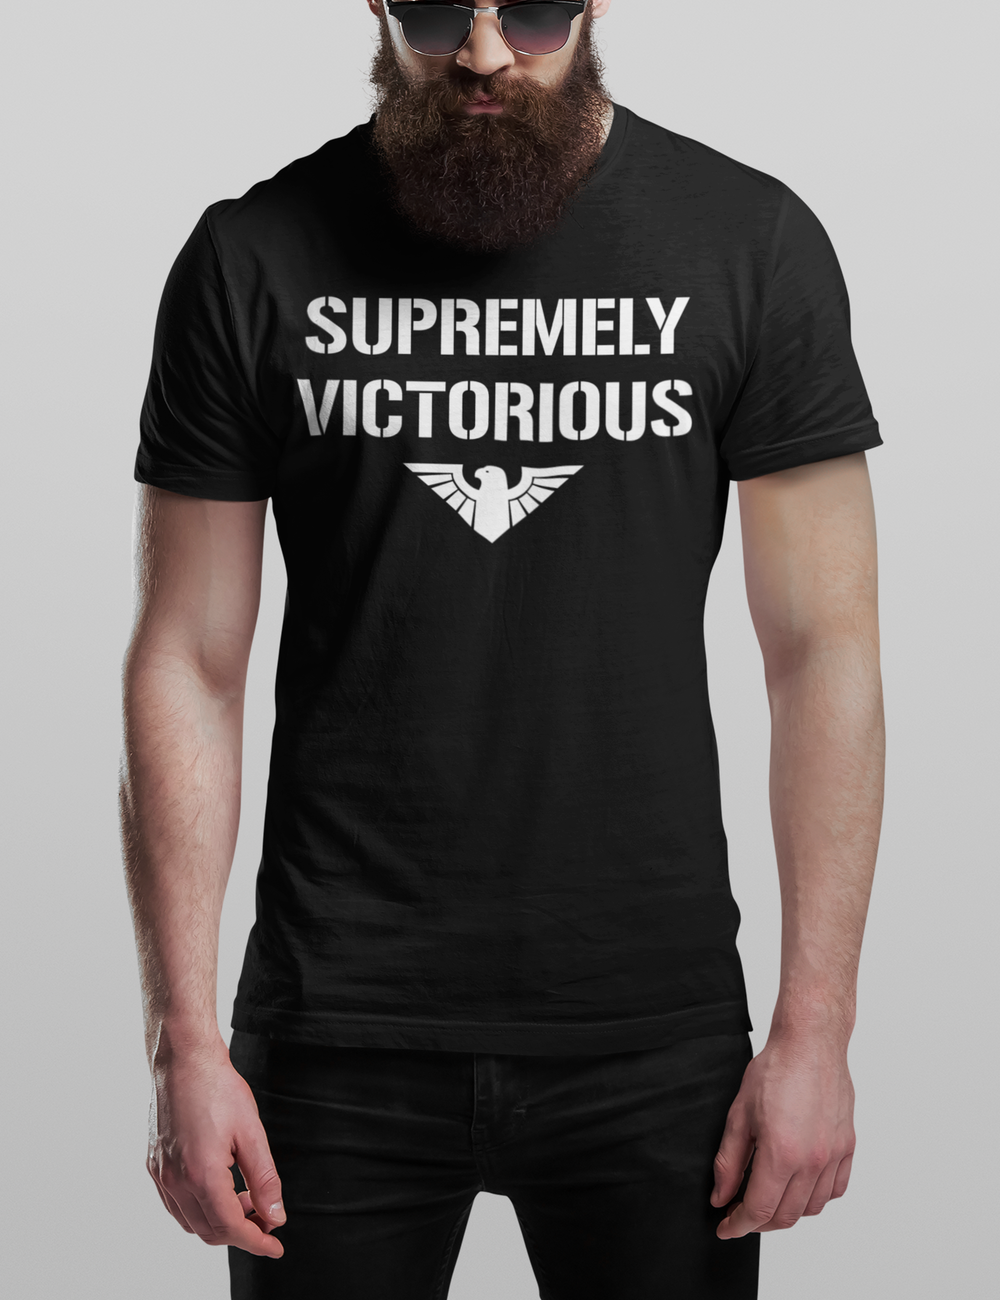 Supremely Victorious | Men's Fitted T-Shirt OniTakai